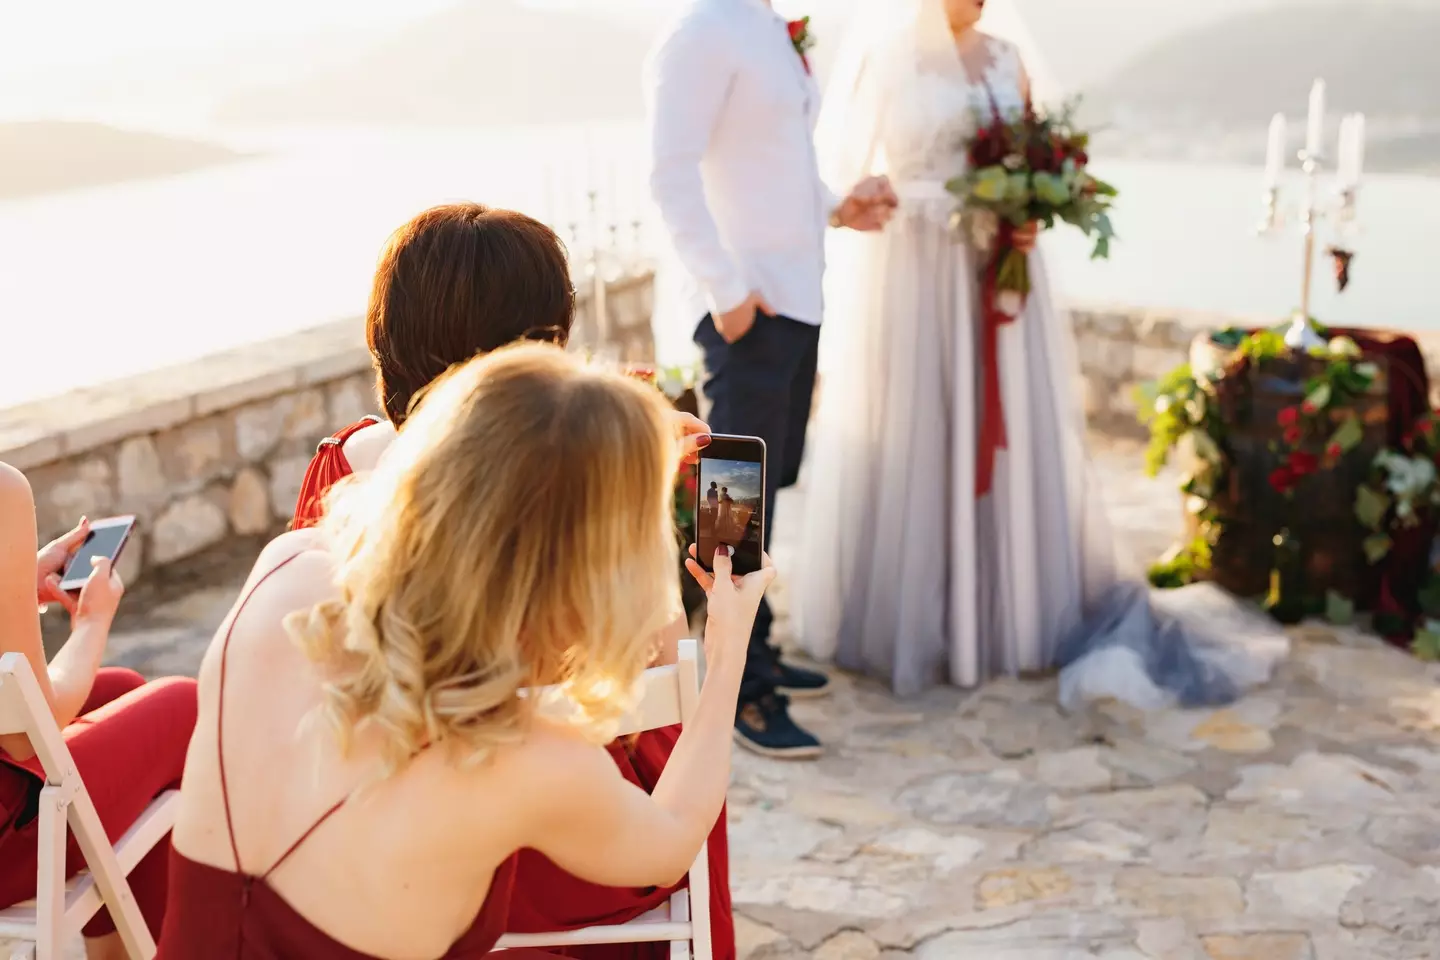 Guests are banned from taking pictures before the first kiss and reception.